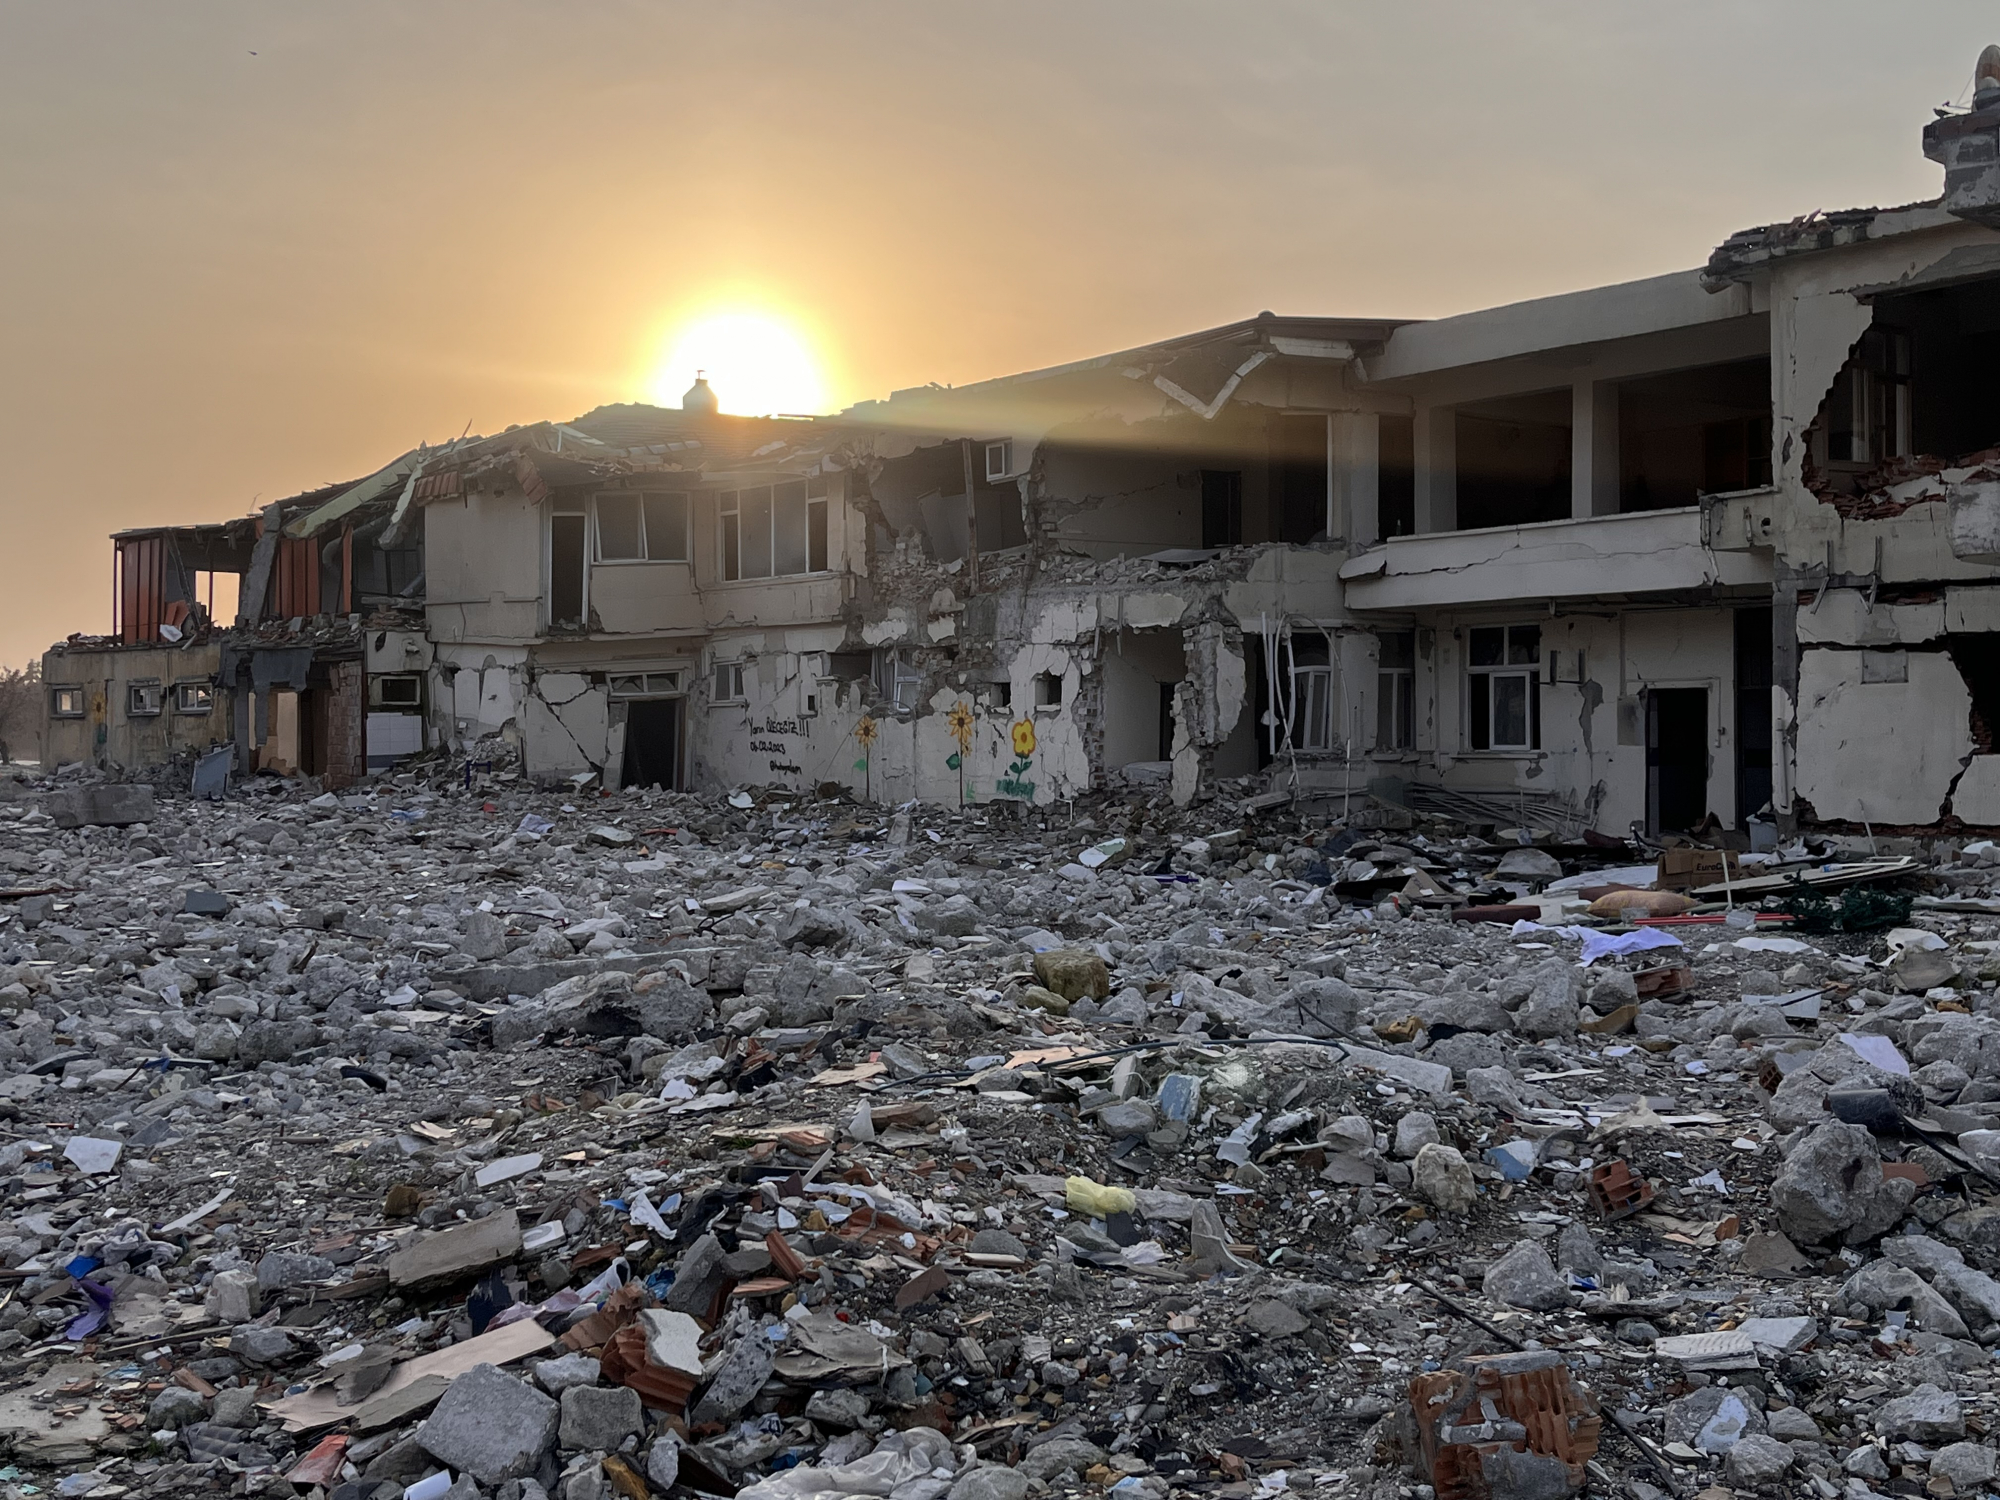 The sun rises over the remains of building destroyed by the earthquake. In the foreground is a pile of rubble from the damaged building.